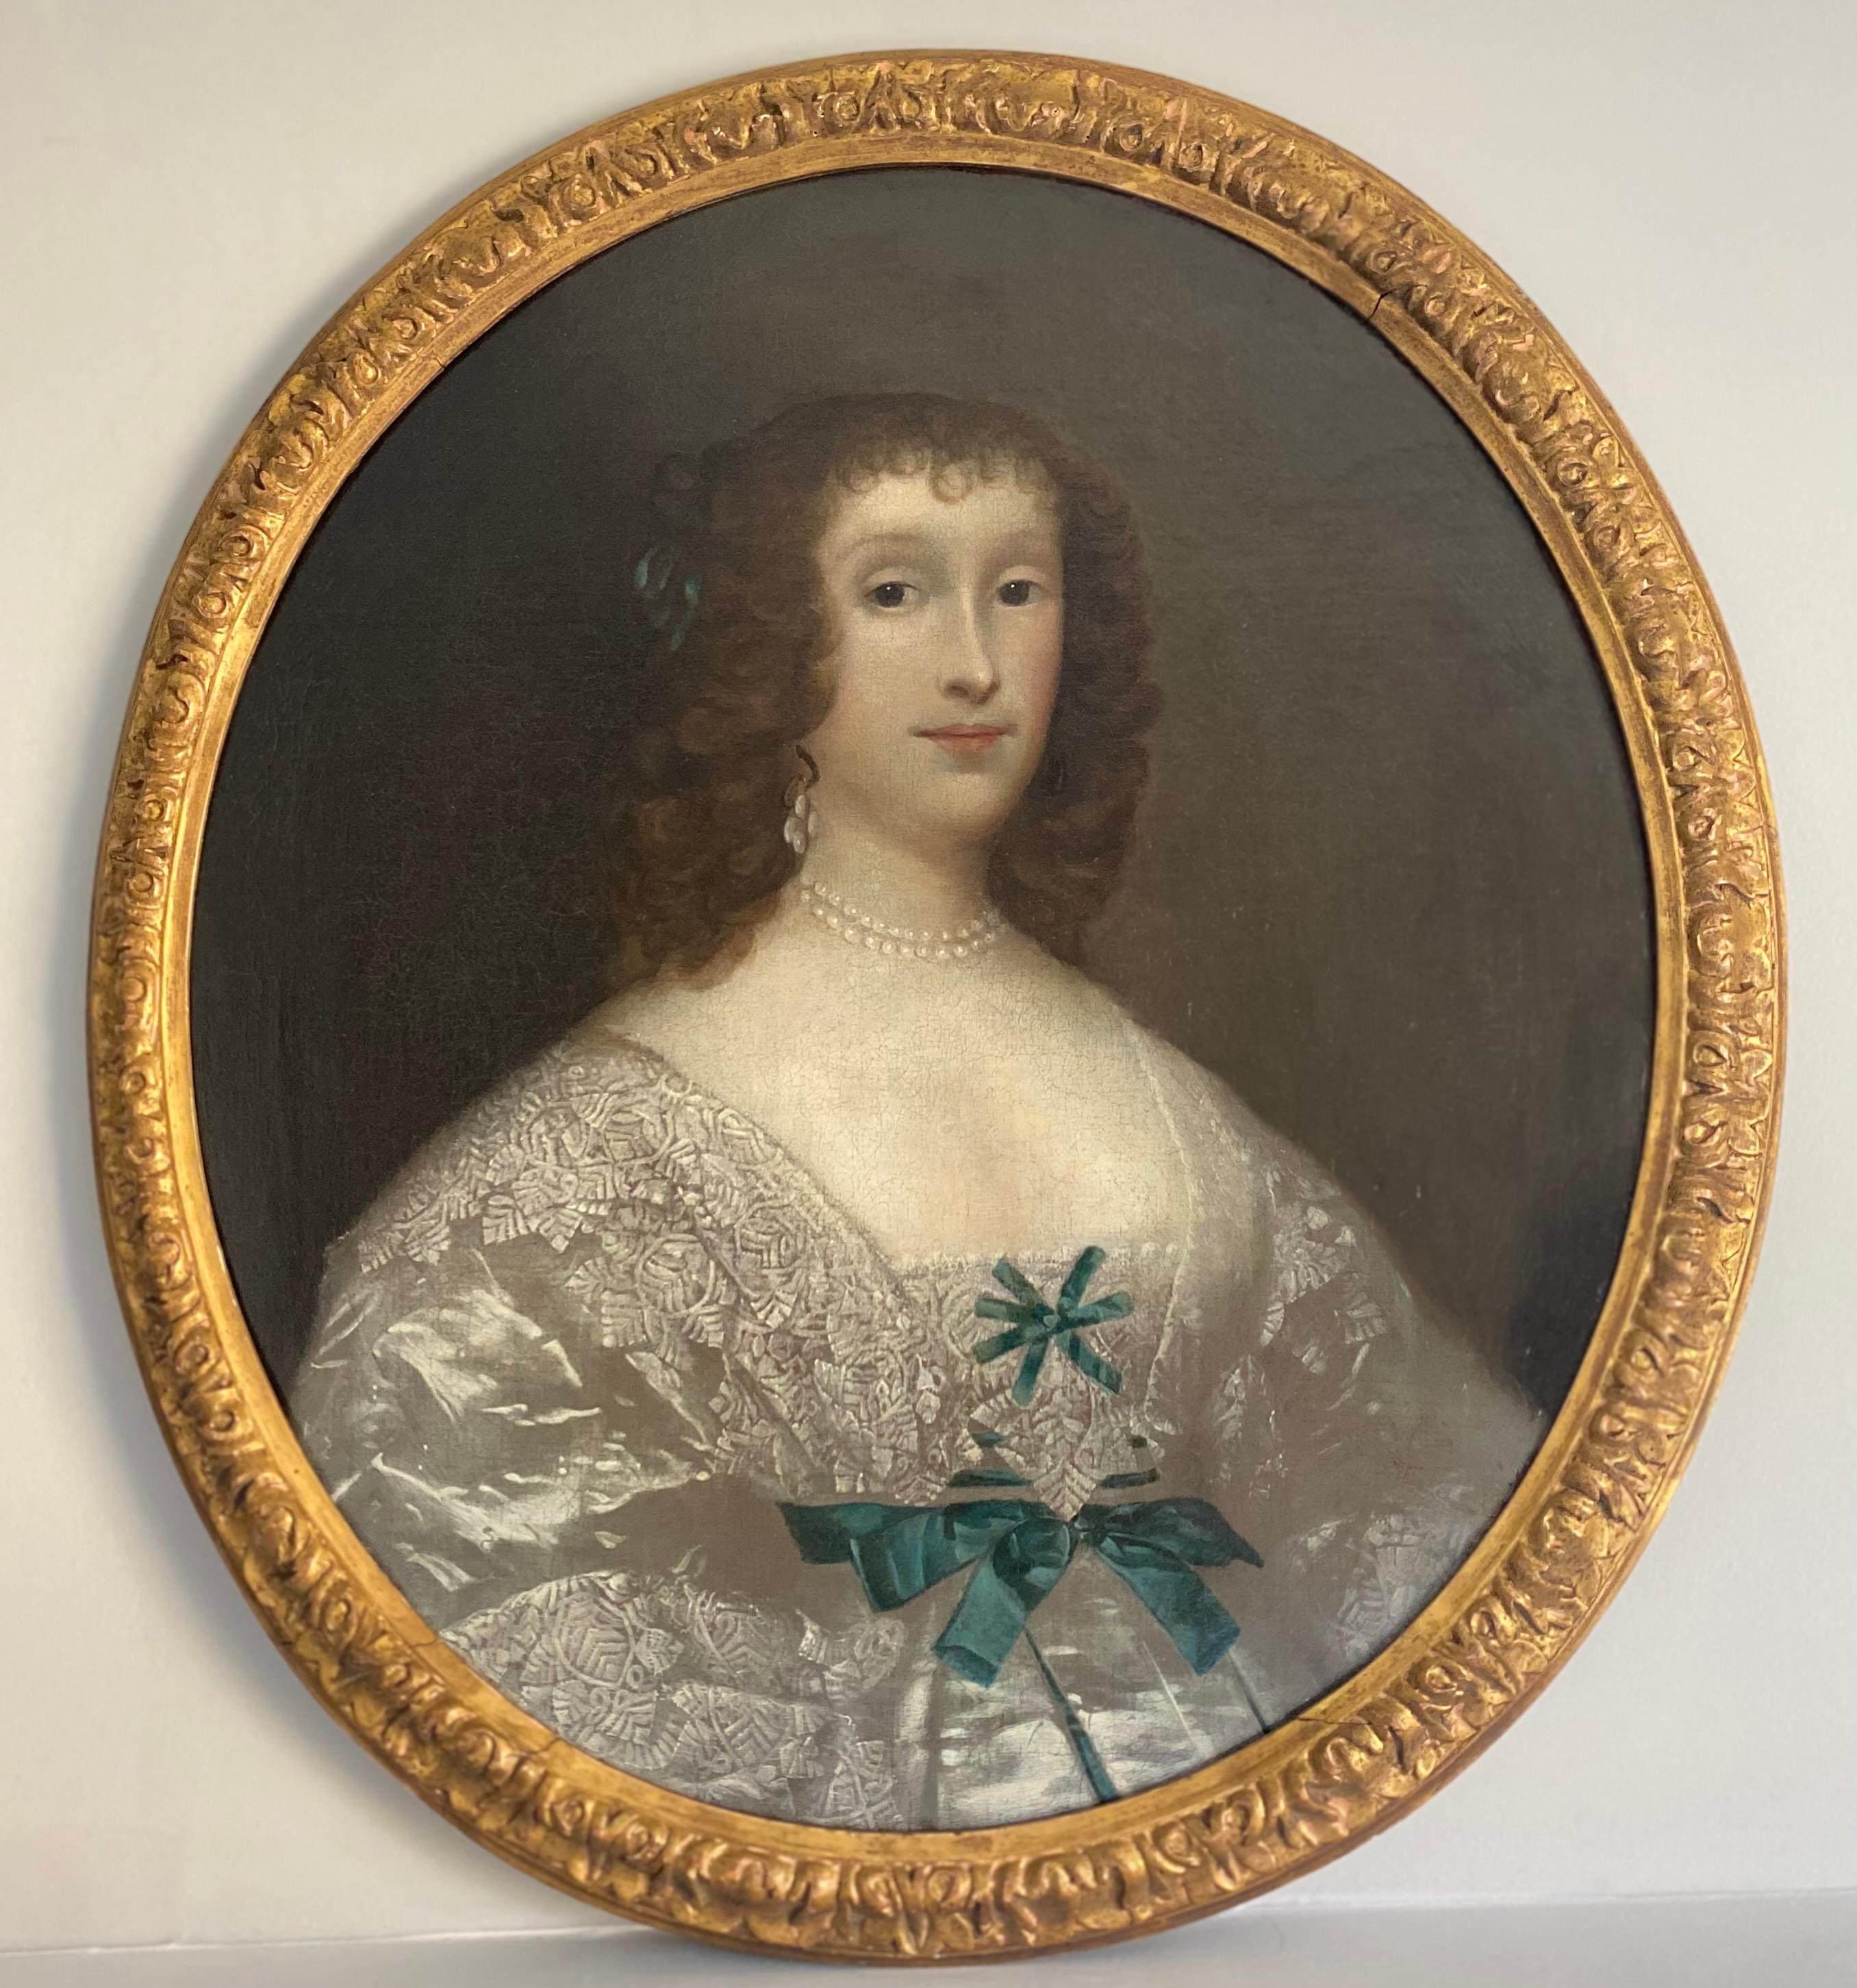 17th century portrait of lady in an ivory silk gown and lace collar